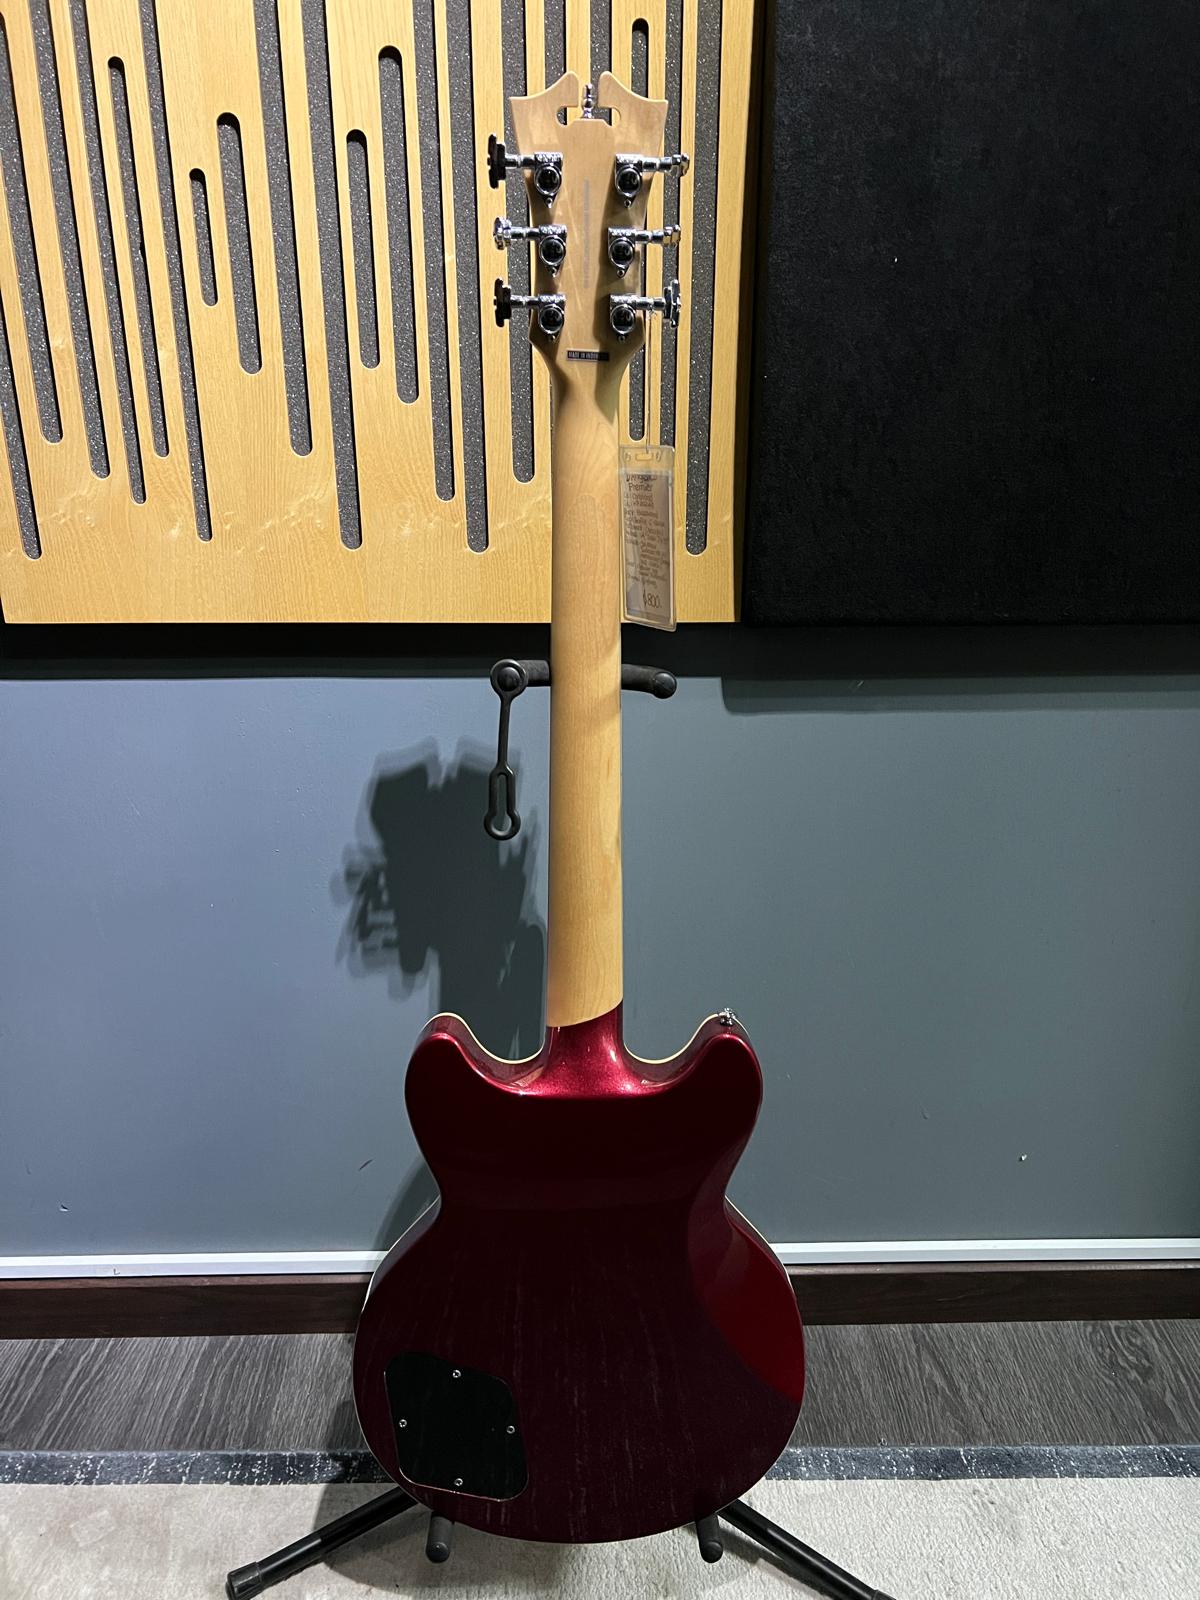 D'Angelico premier (used)